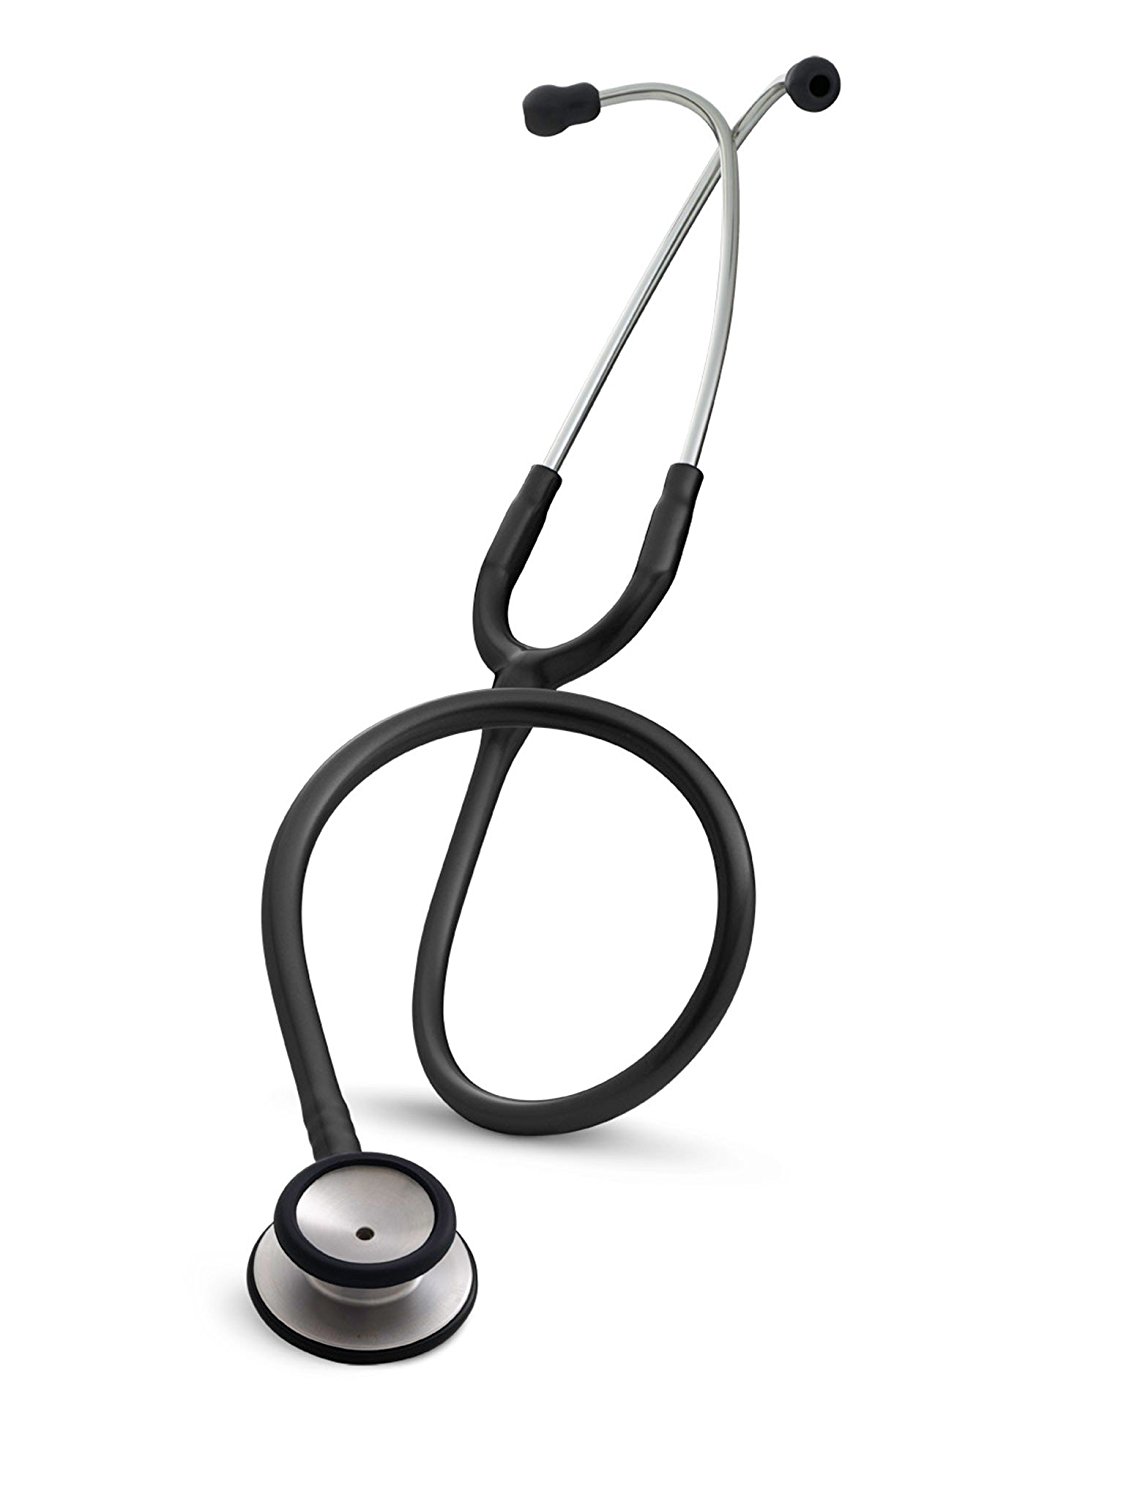 Picture Of Stethoscope